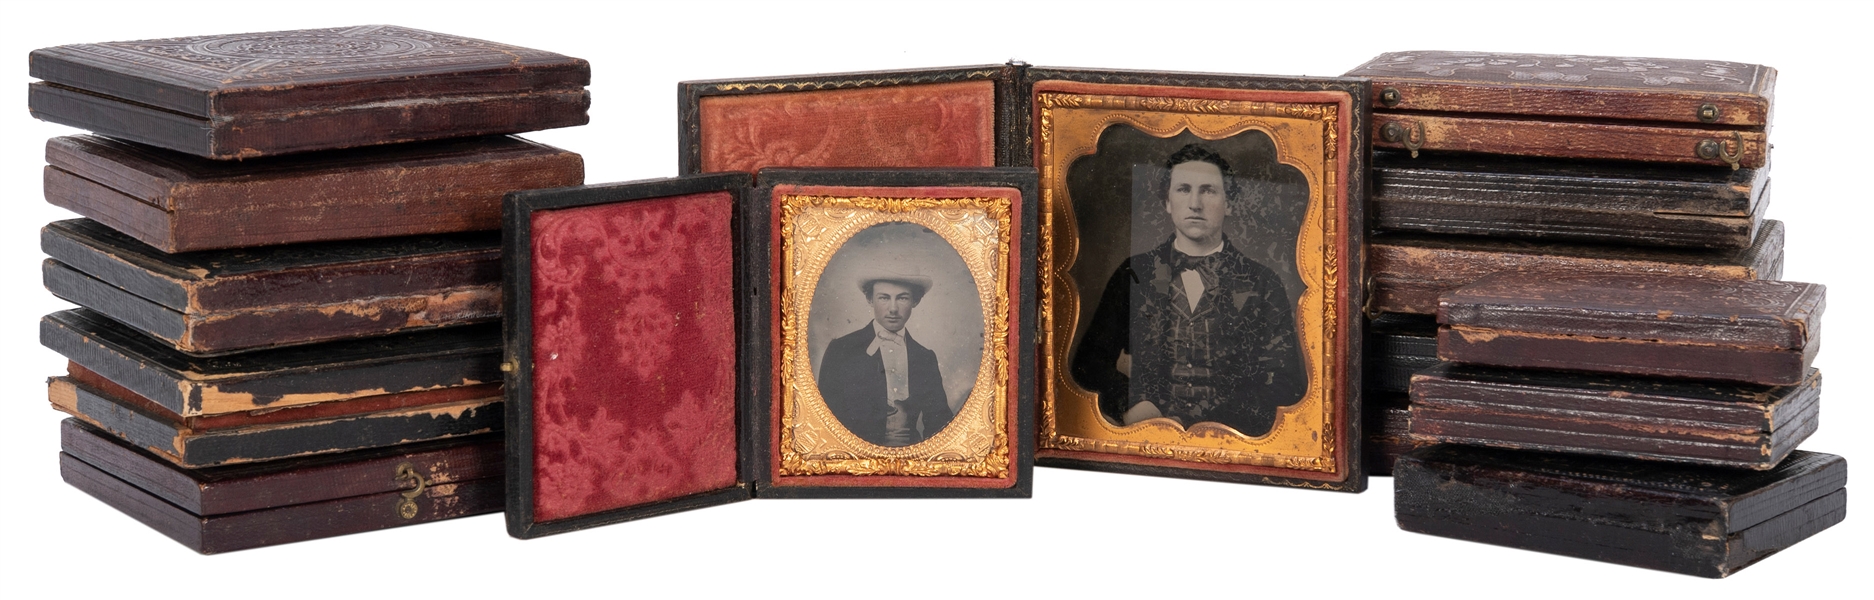  Collection of daguerreotypes and ambrotypes. 12 daguerreoty...